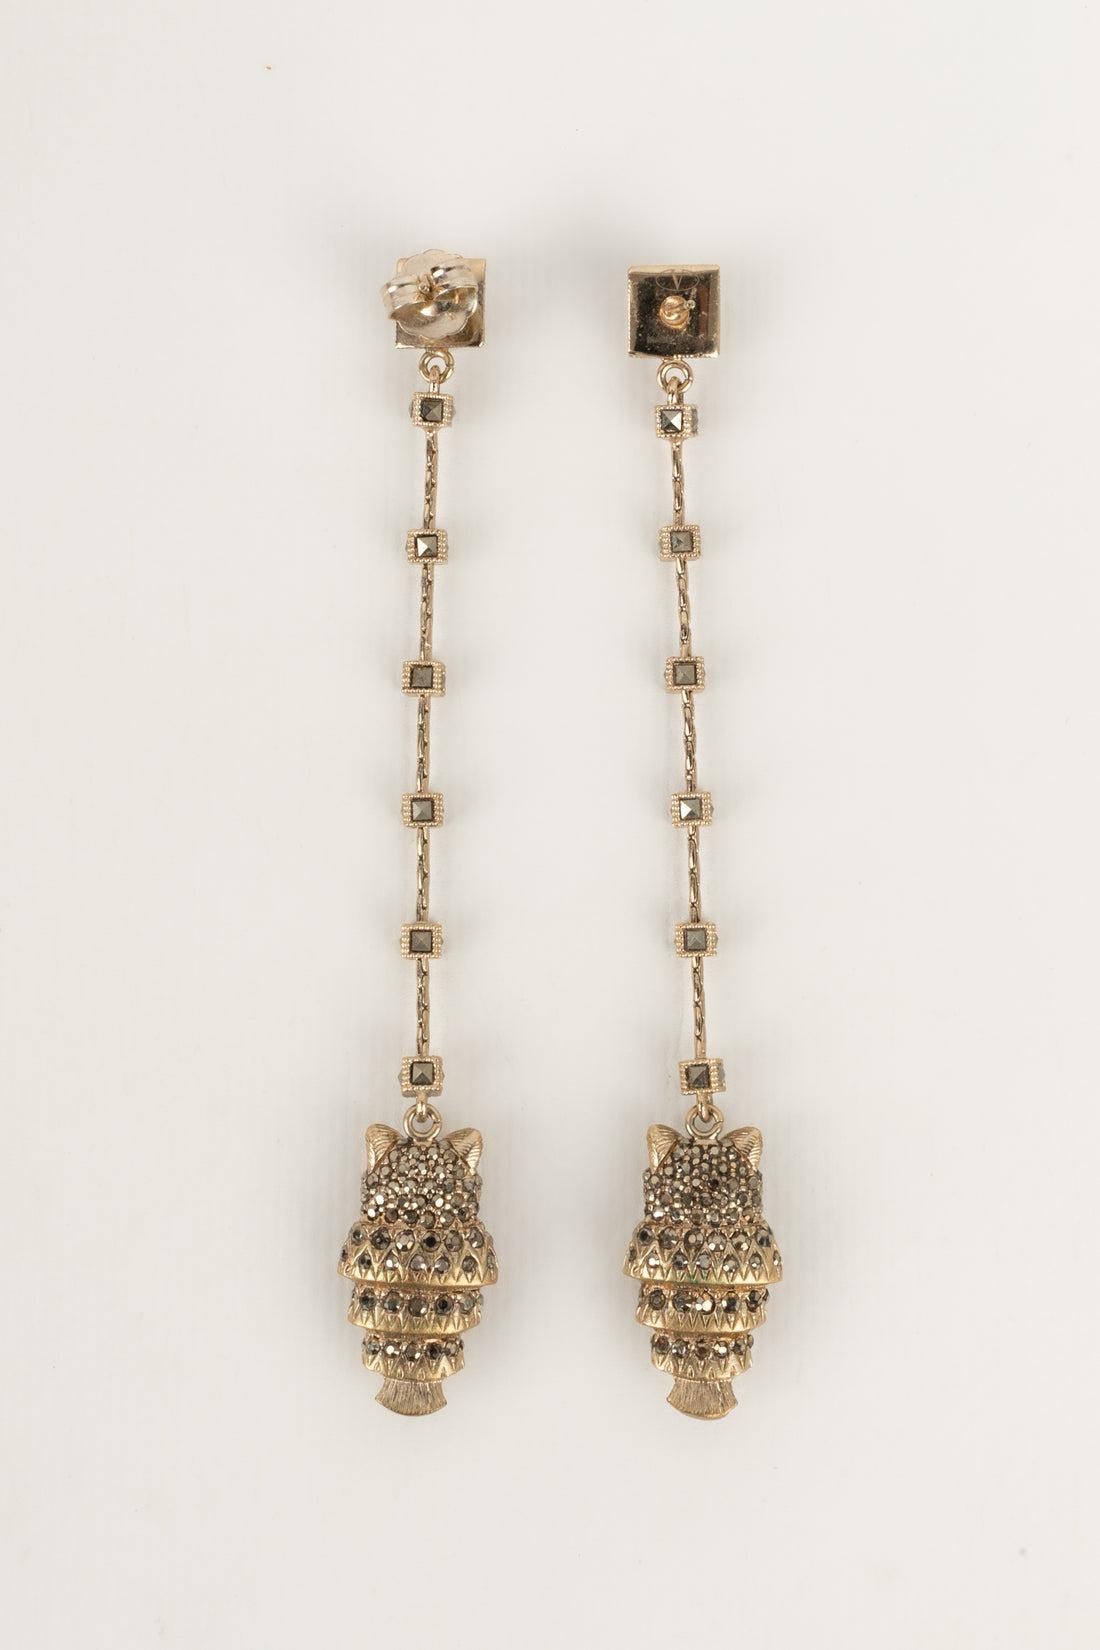 Valentino Golden Metal Earrings with Rhinestones In Excellent Condition For Sale In SAINT-OUEN-SUR-SEINE, FR